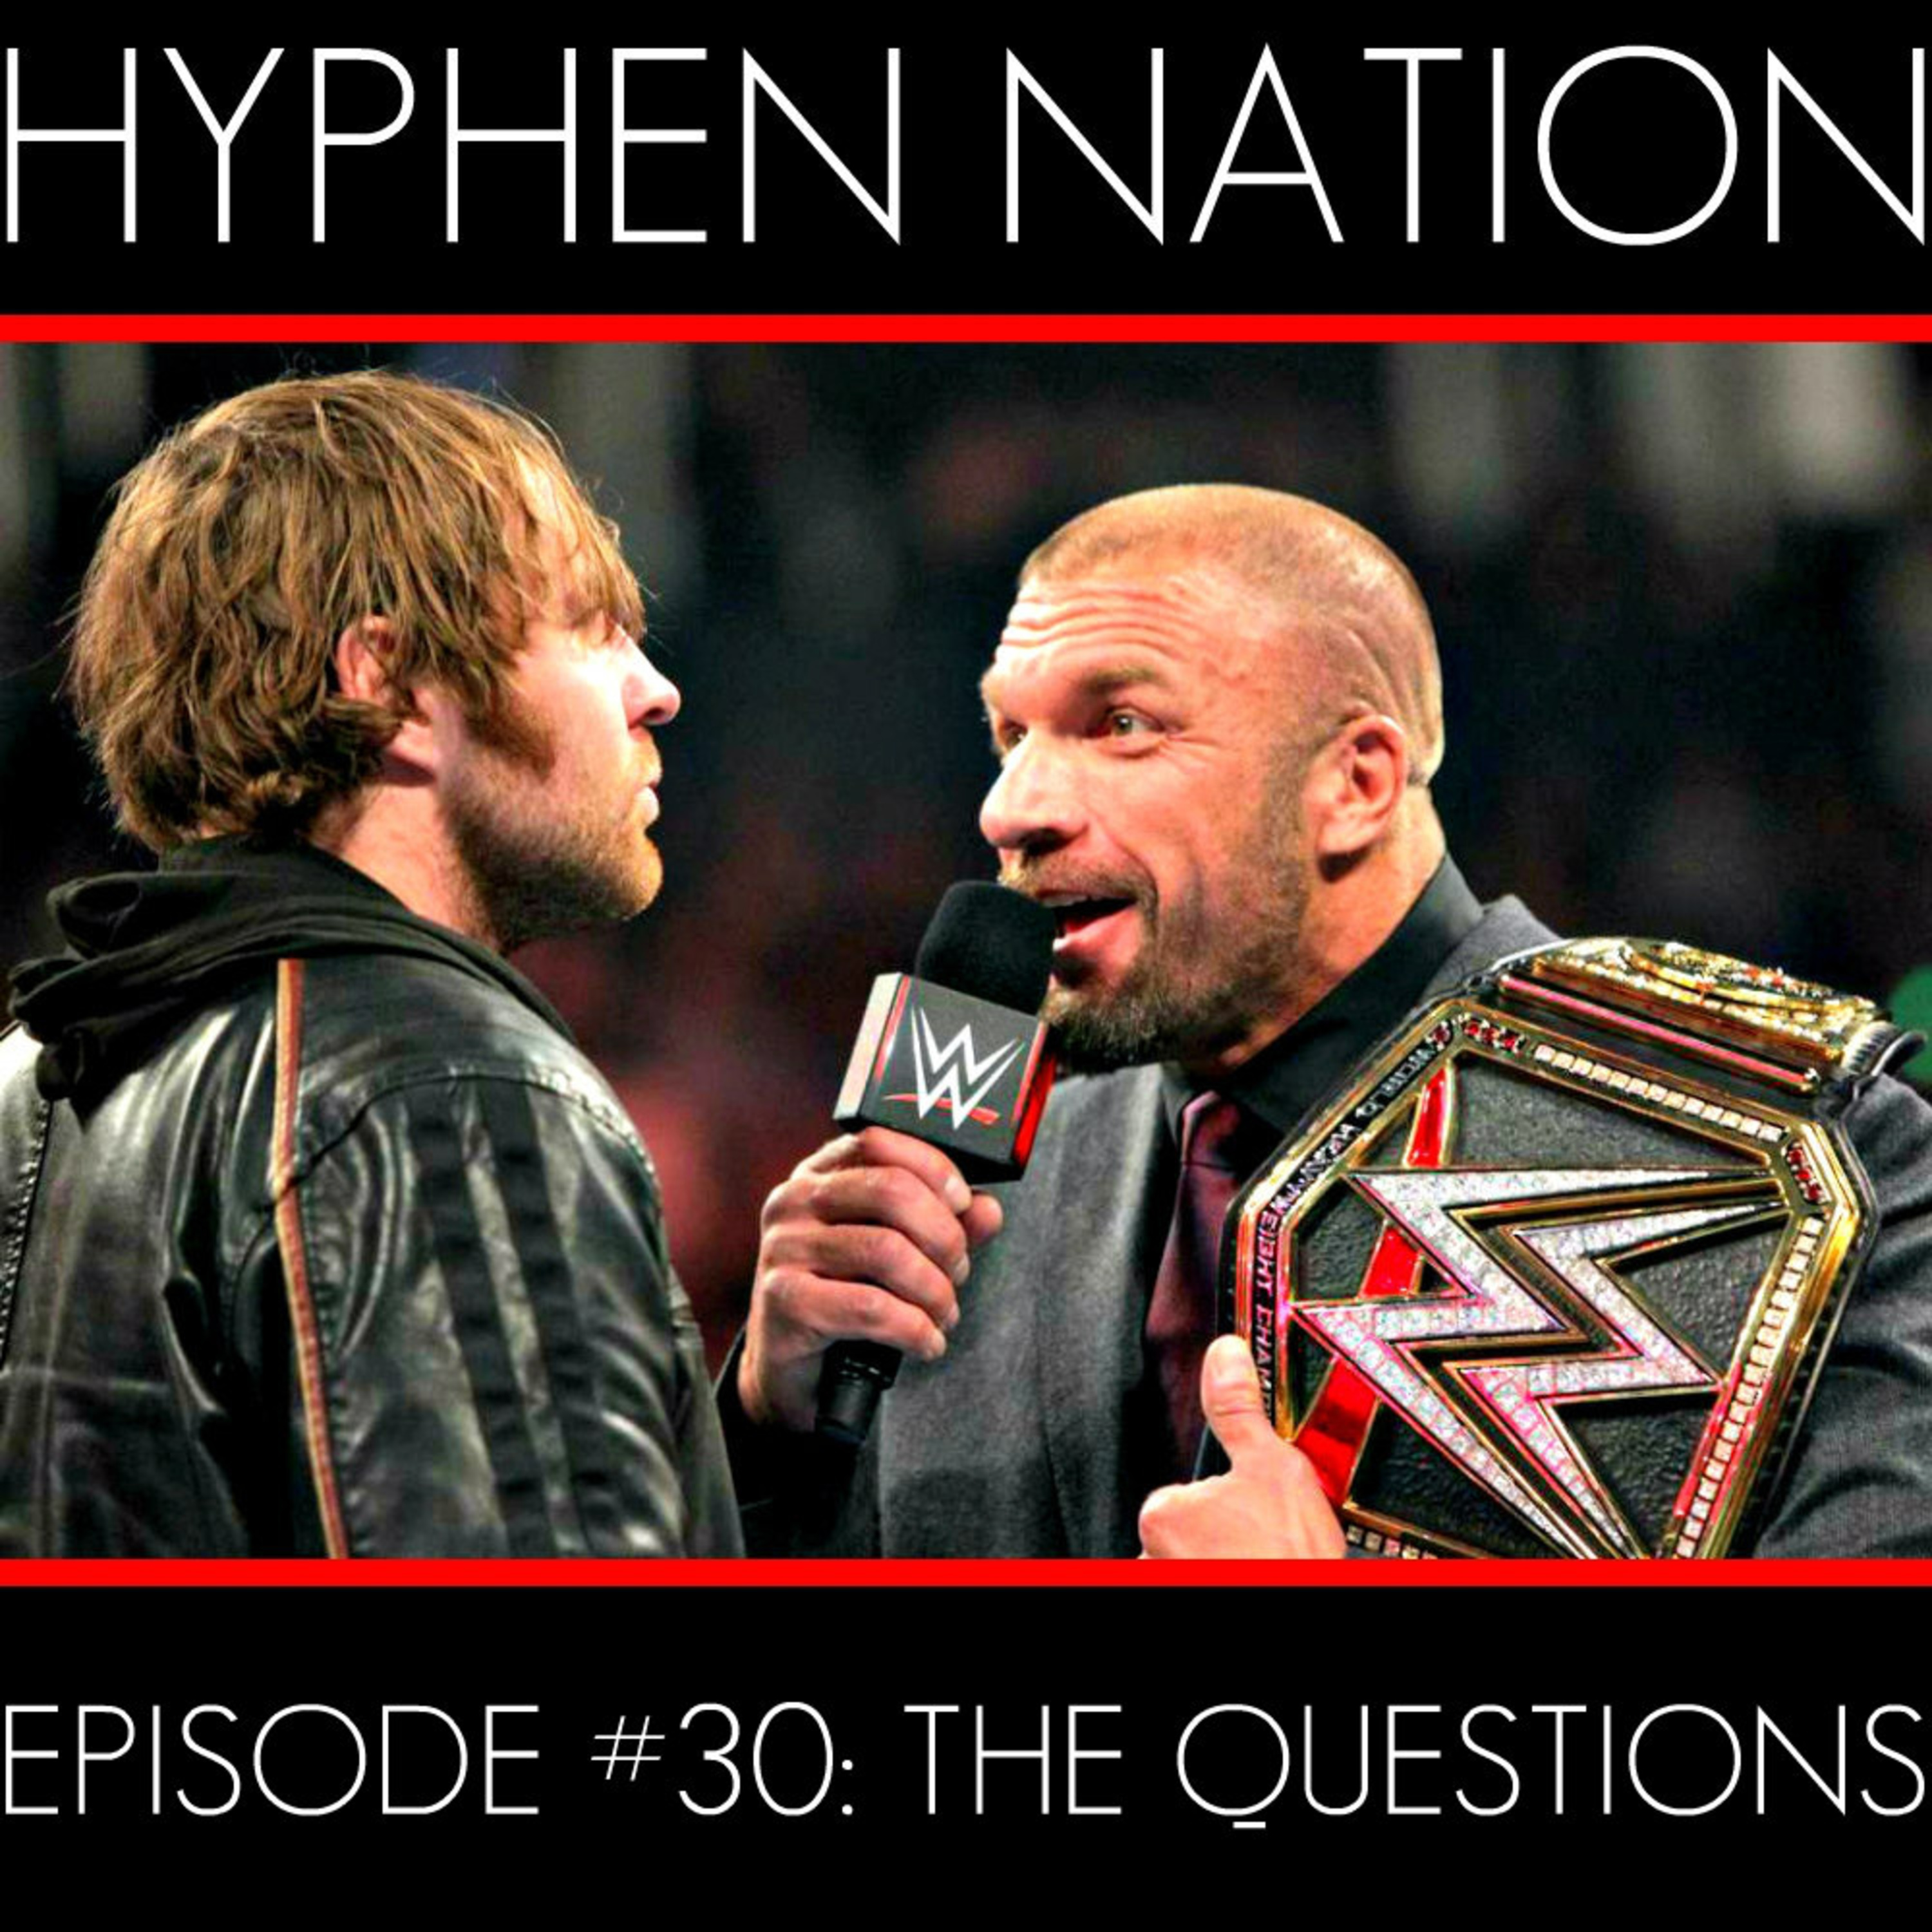 Episode #30: The Questions